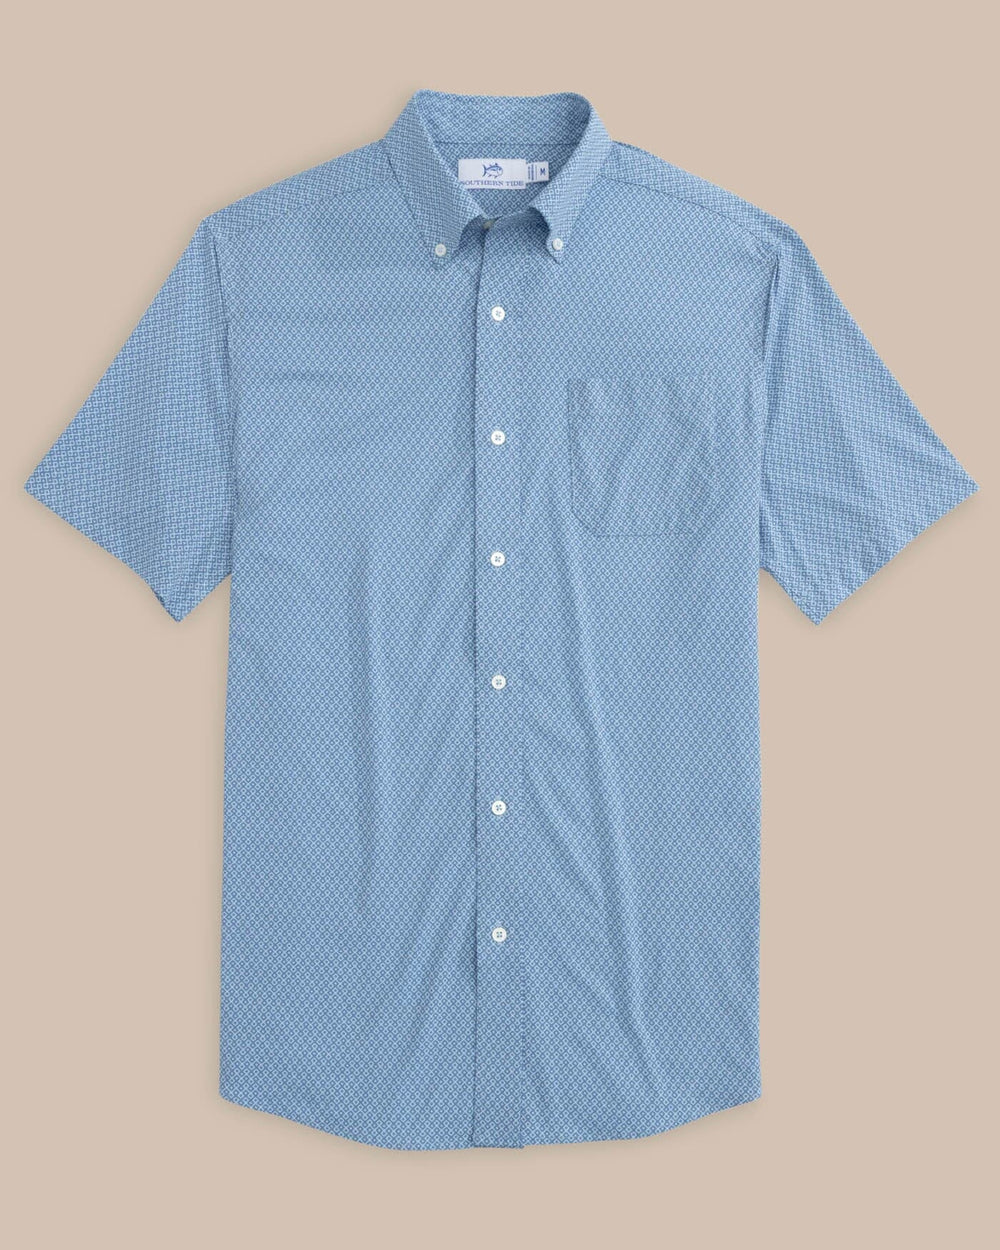 The front view of the Southern Tide brrr Intercoastal Retro Geo Short Sleeve Sportshirt by Southern Tide - Coronet Blue